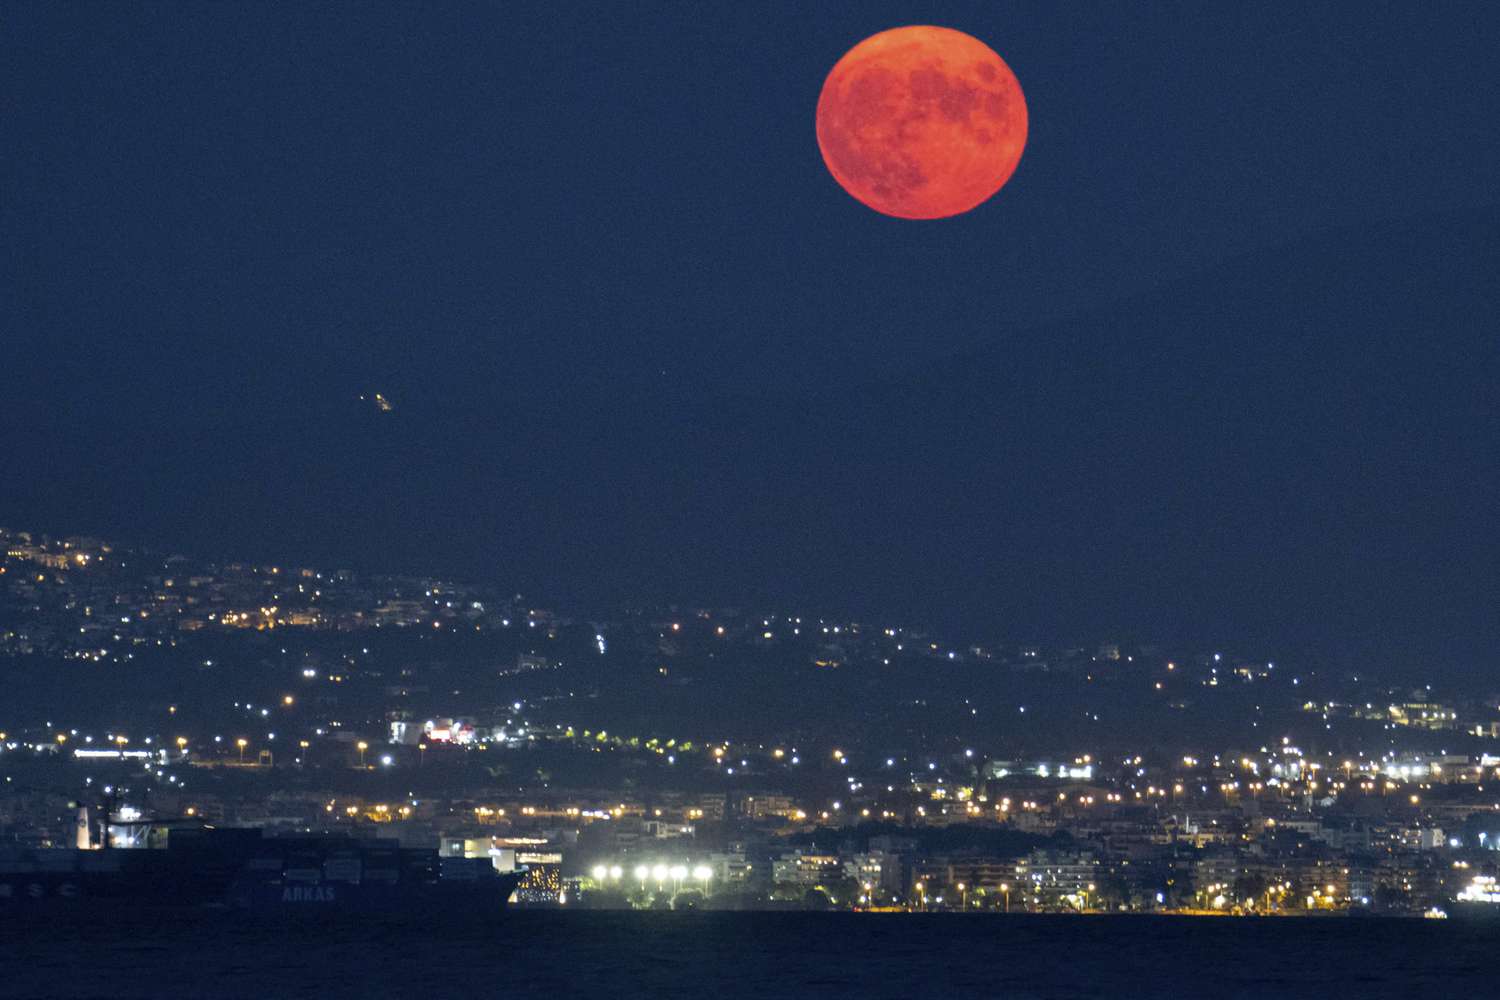 Supermoon takes center stage in August night sky